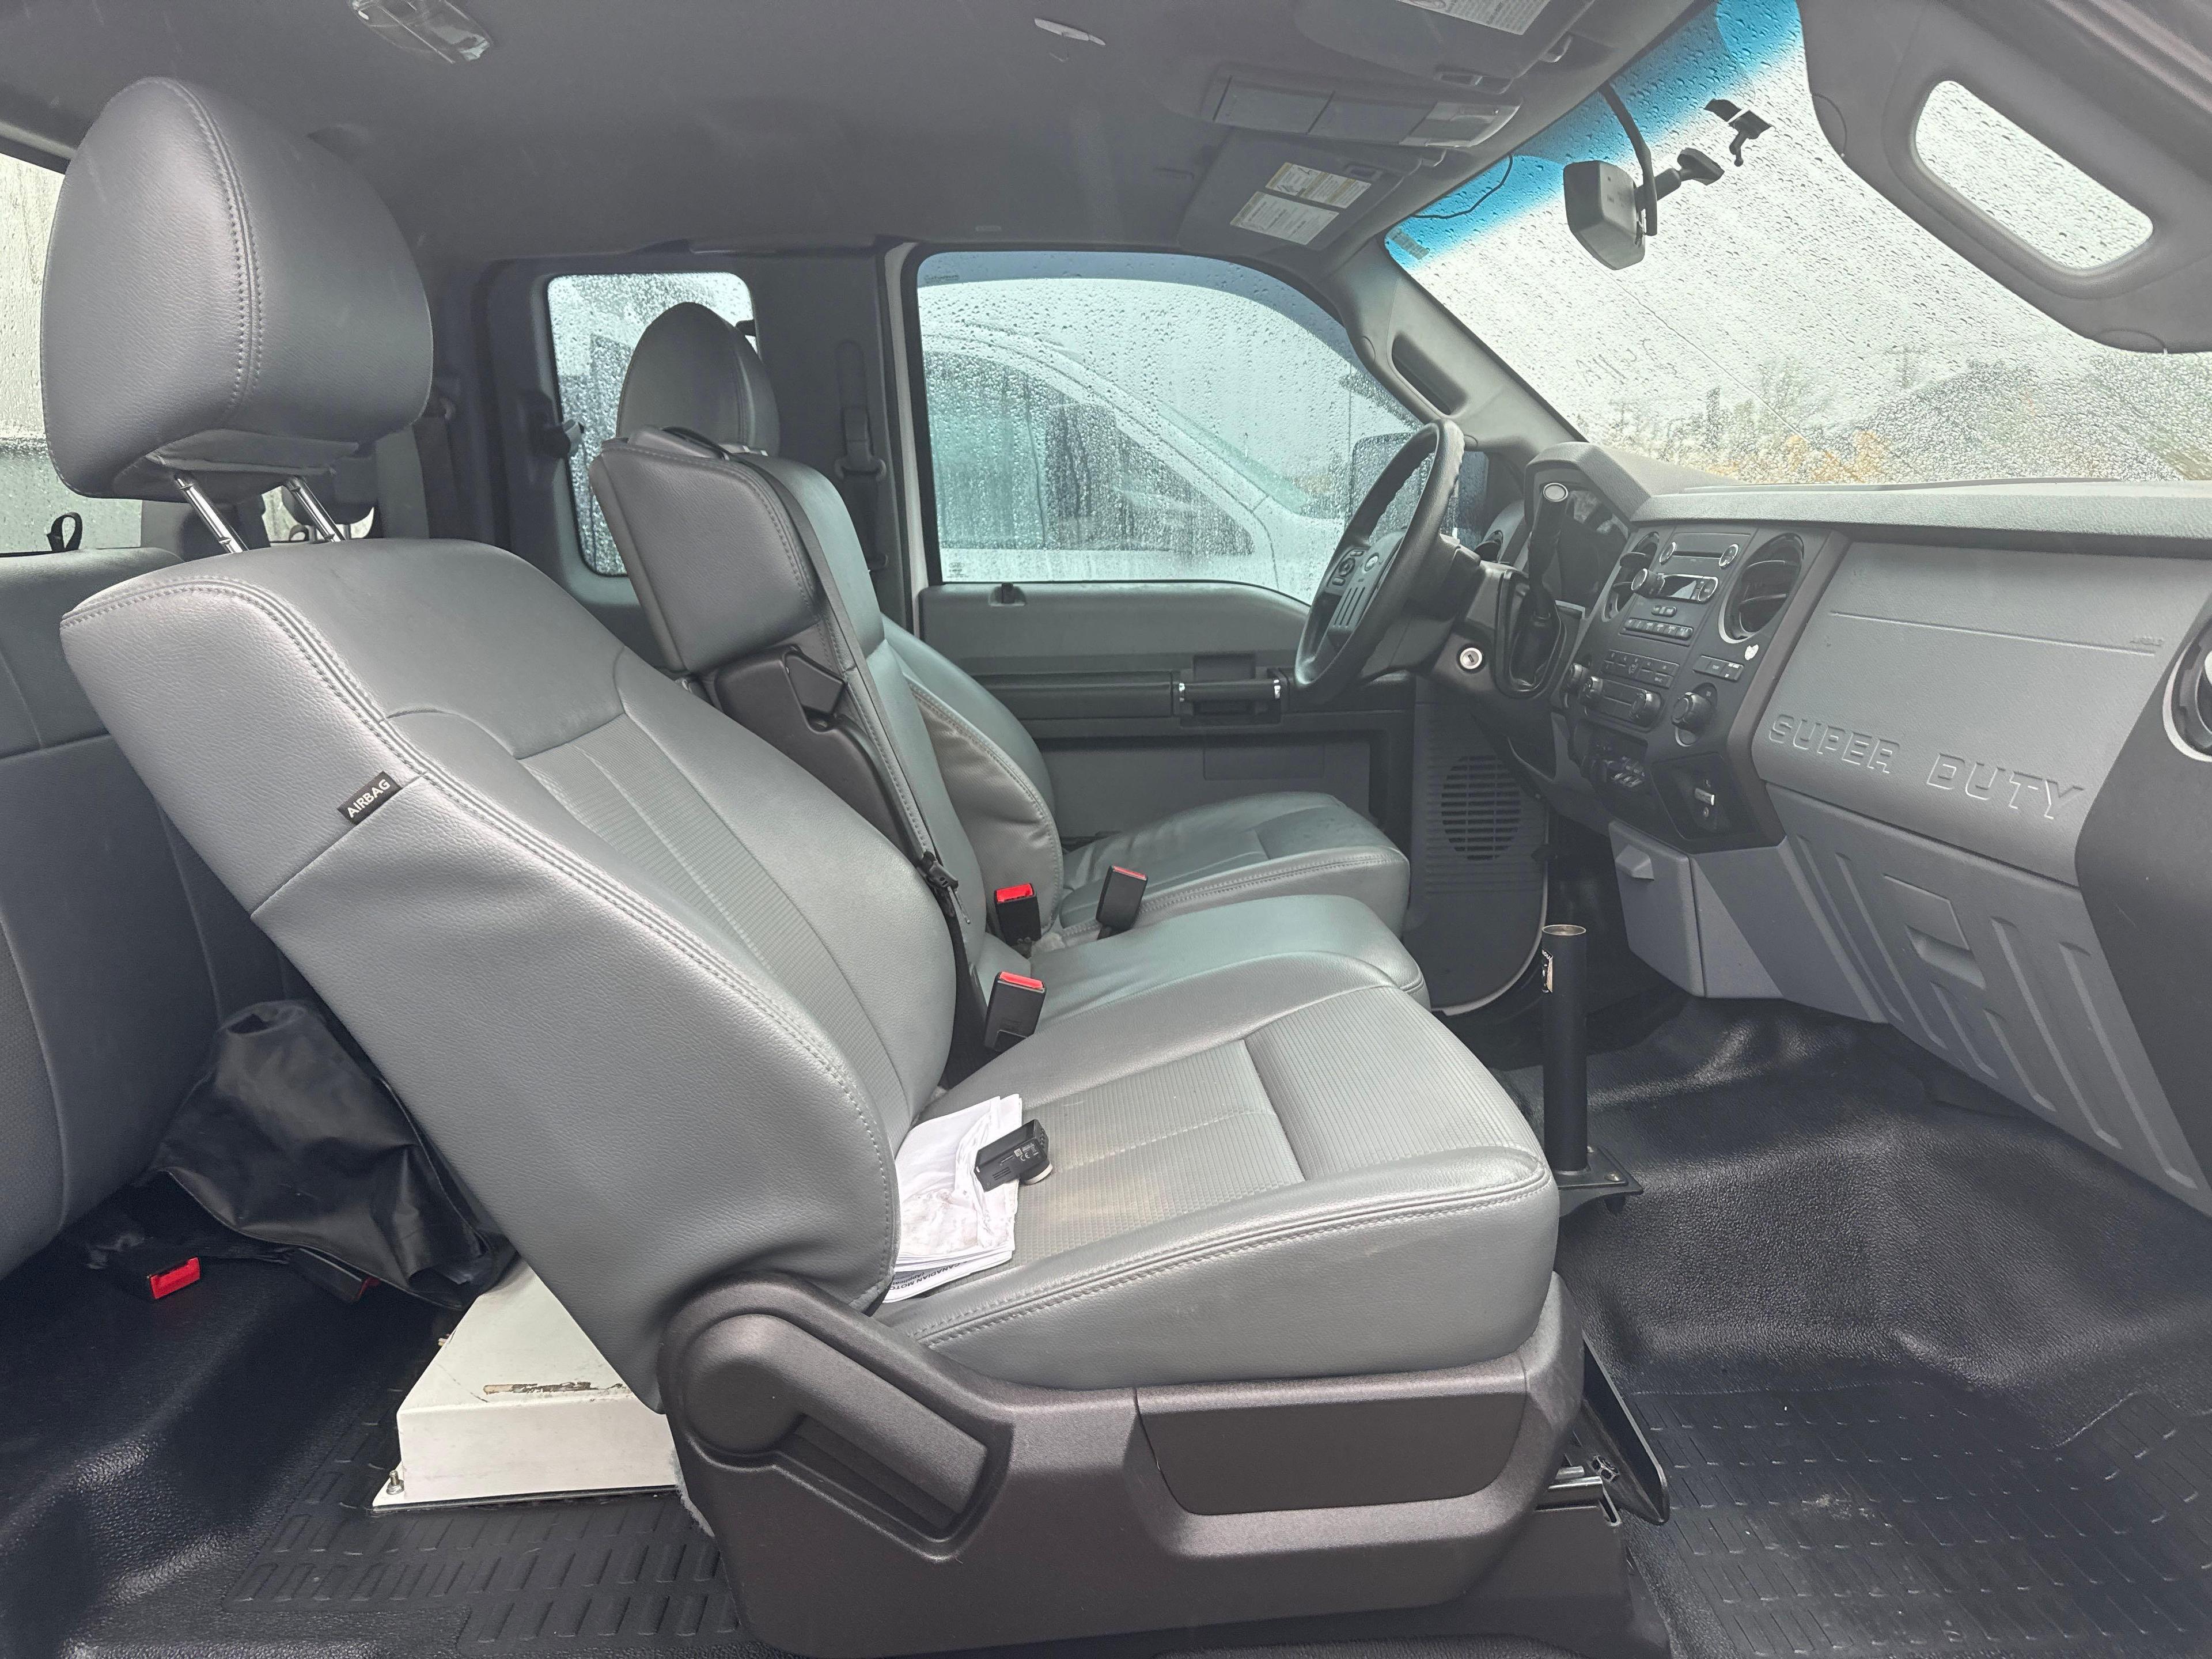 2016 FORD F550 SERVICE TRUCK VN:B45127 powered by diesel engine, equipped with automatic